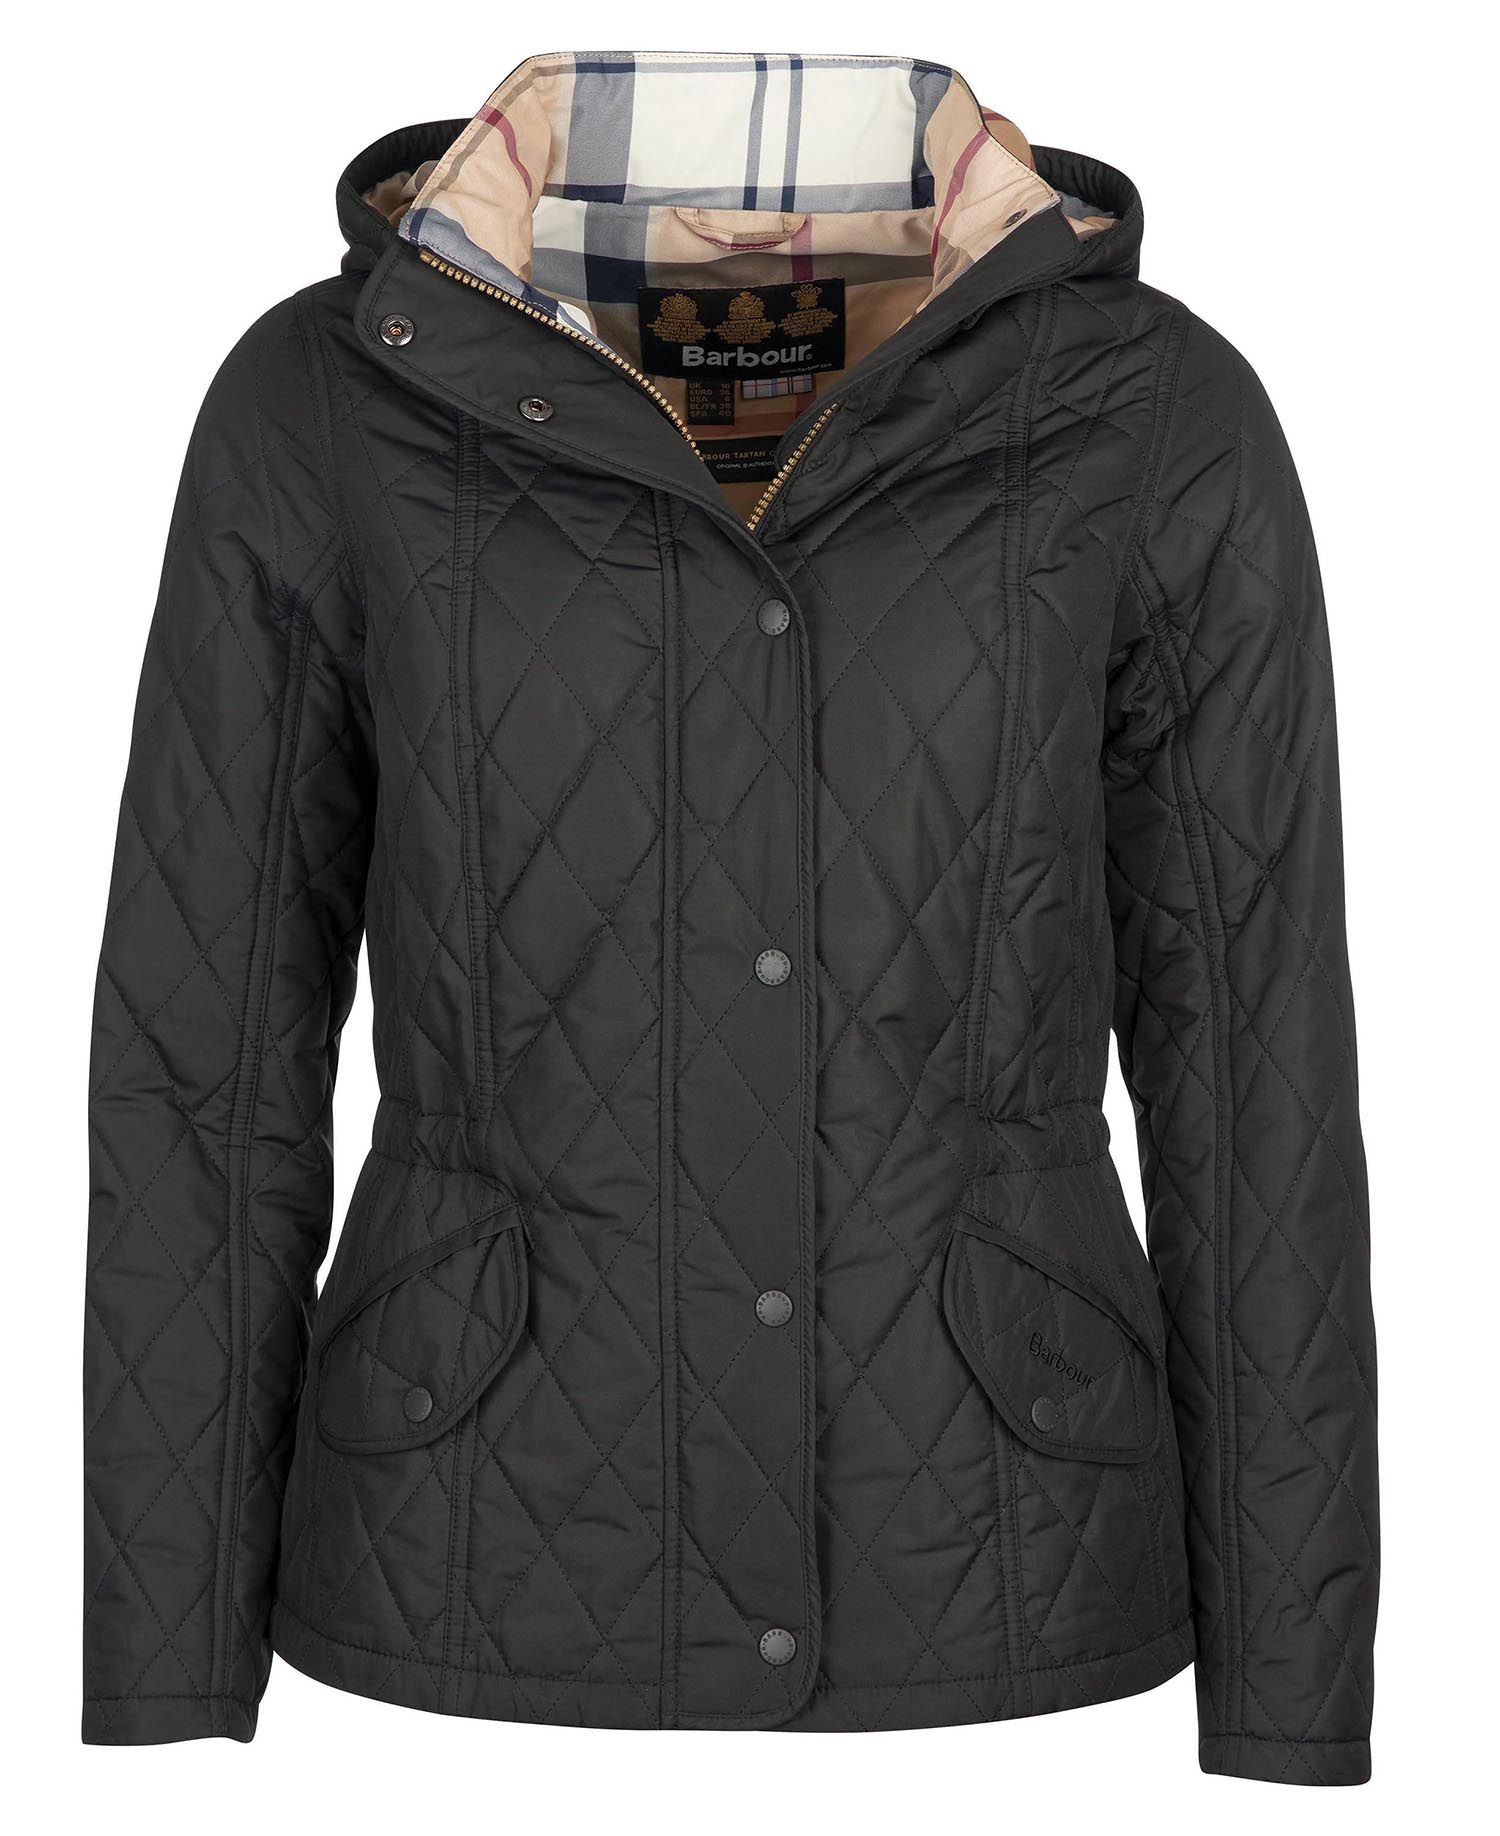 Barbour Millfire Quilted Jacket - Black SeriousCountrySports.com